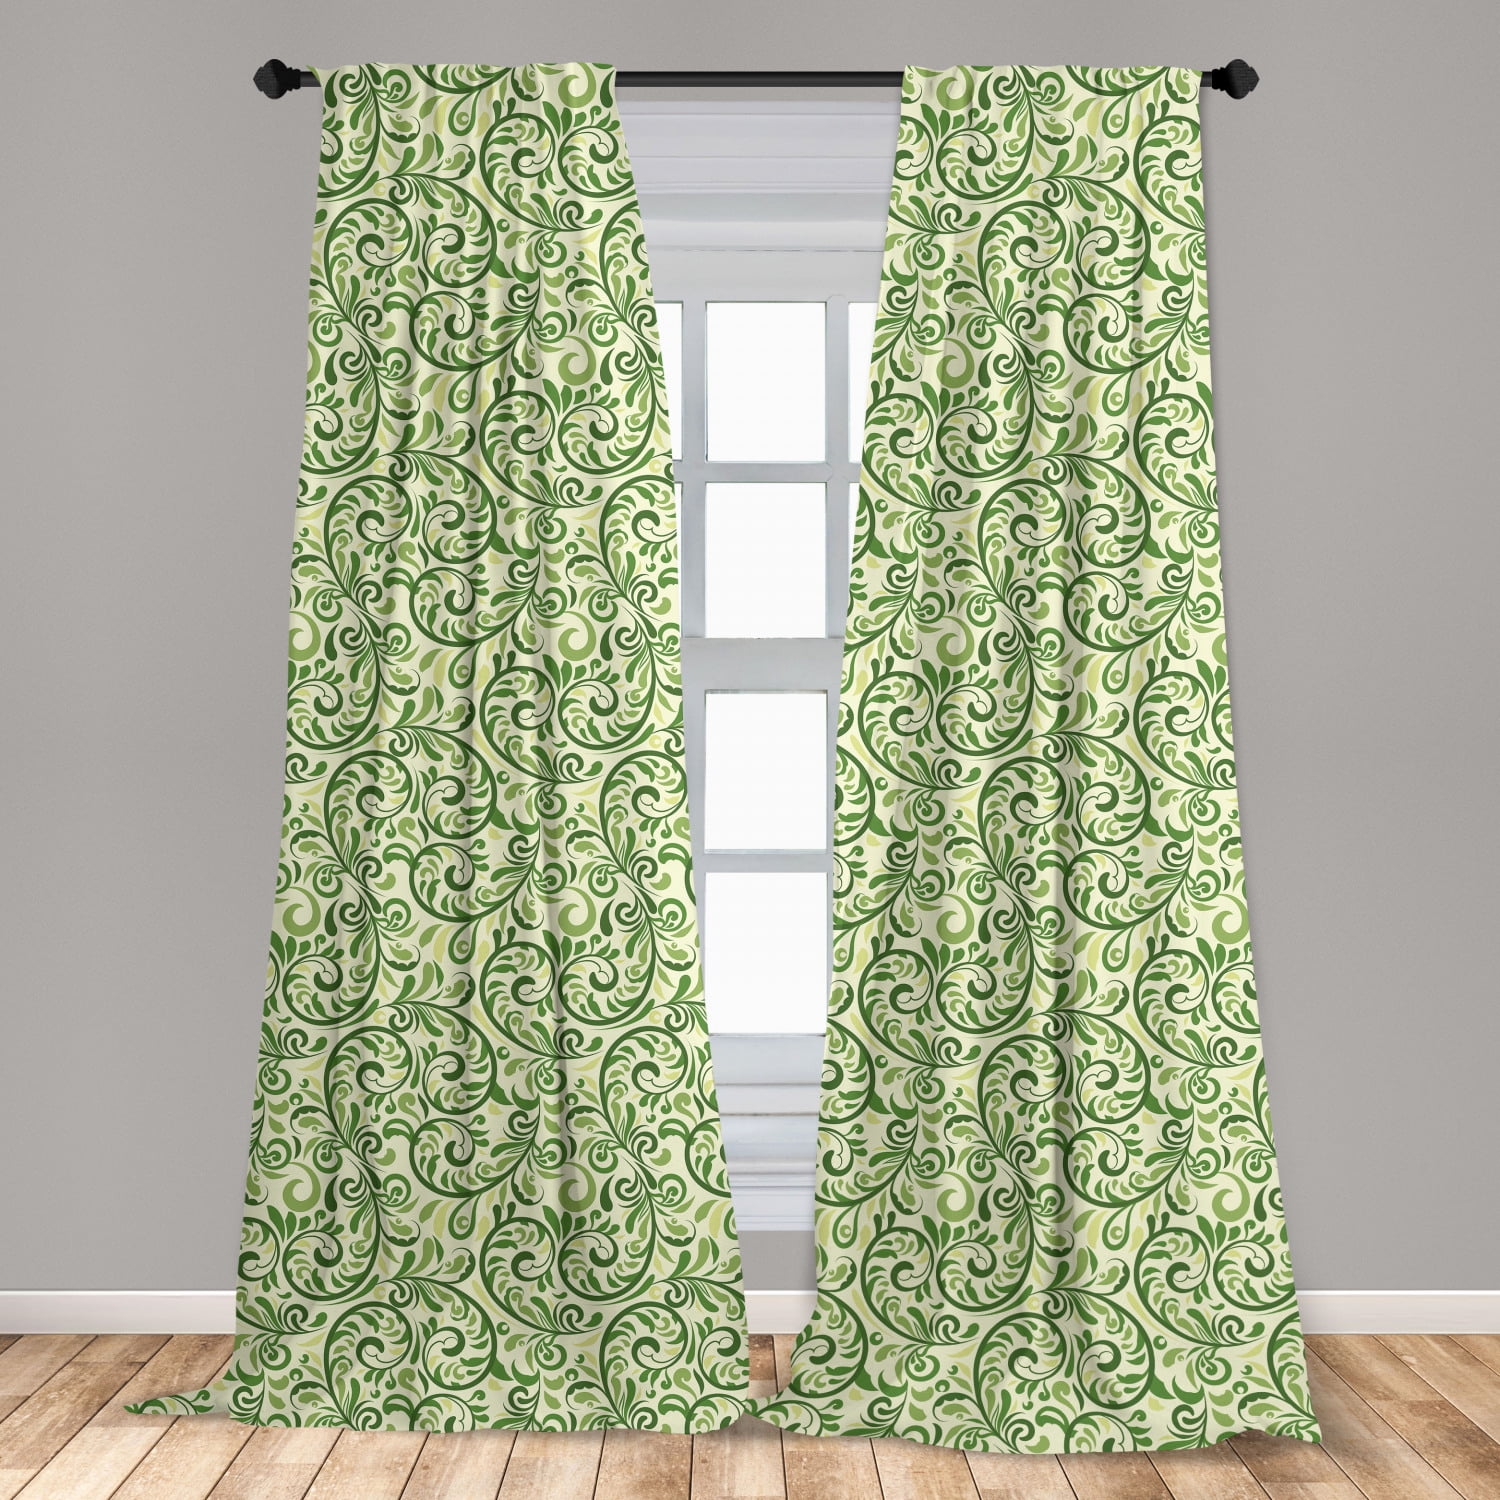 St Patrick's Day Curtains Celebration Window Drapes 2 Panel Set 108x84 Inches 